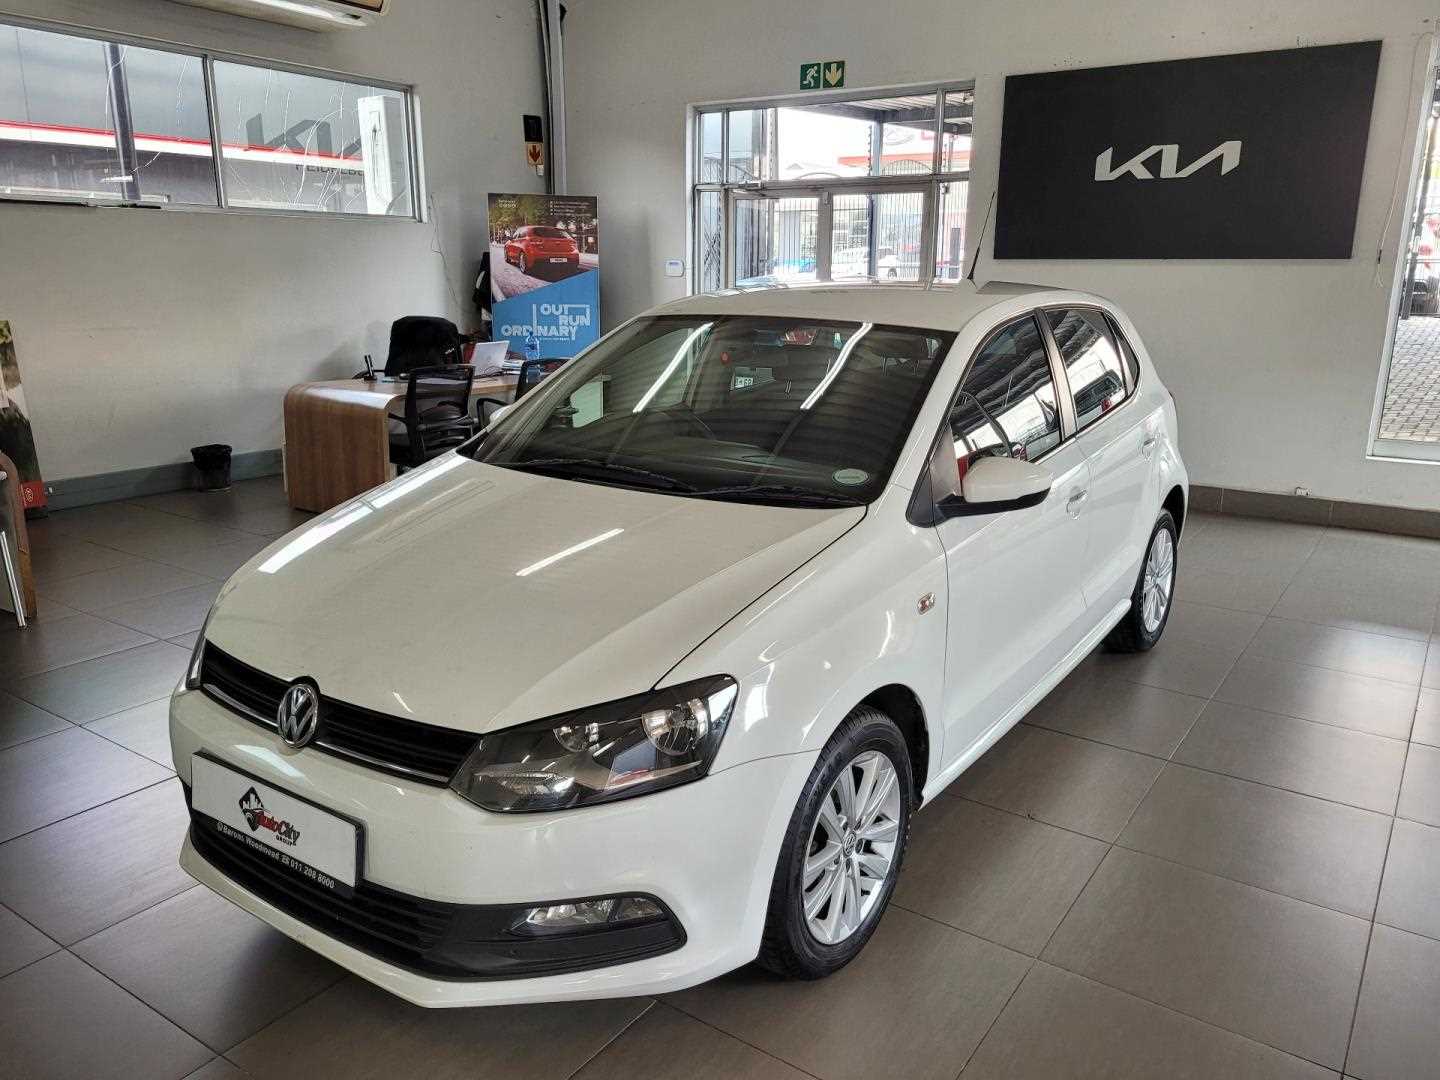 Volkswagen POLO VIVO 1.4 COMFORTLINE (5DR) for Sale in South Africa